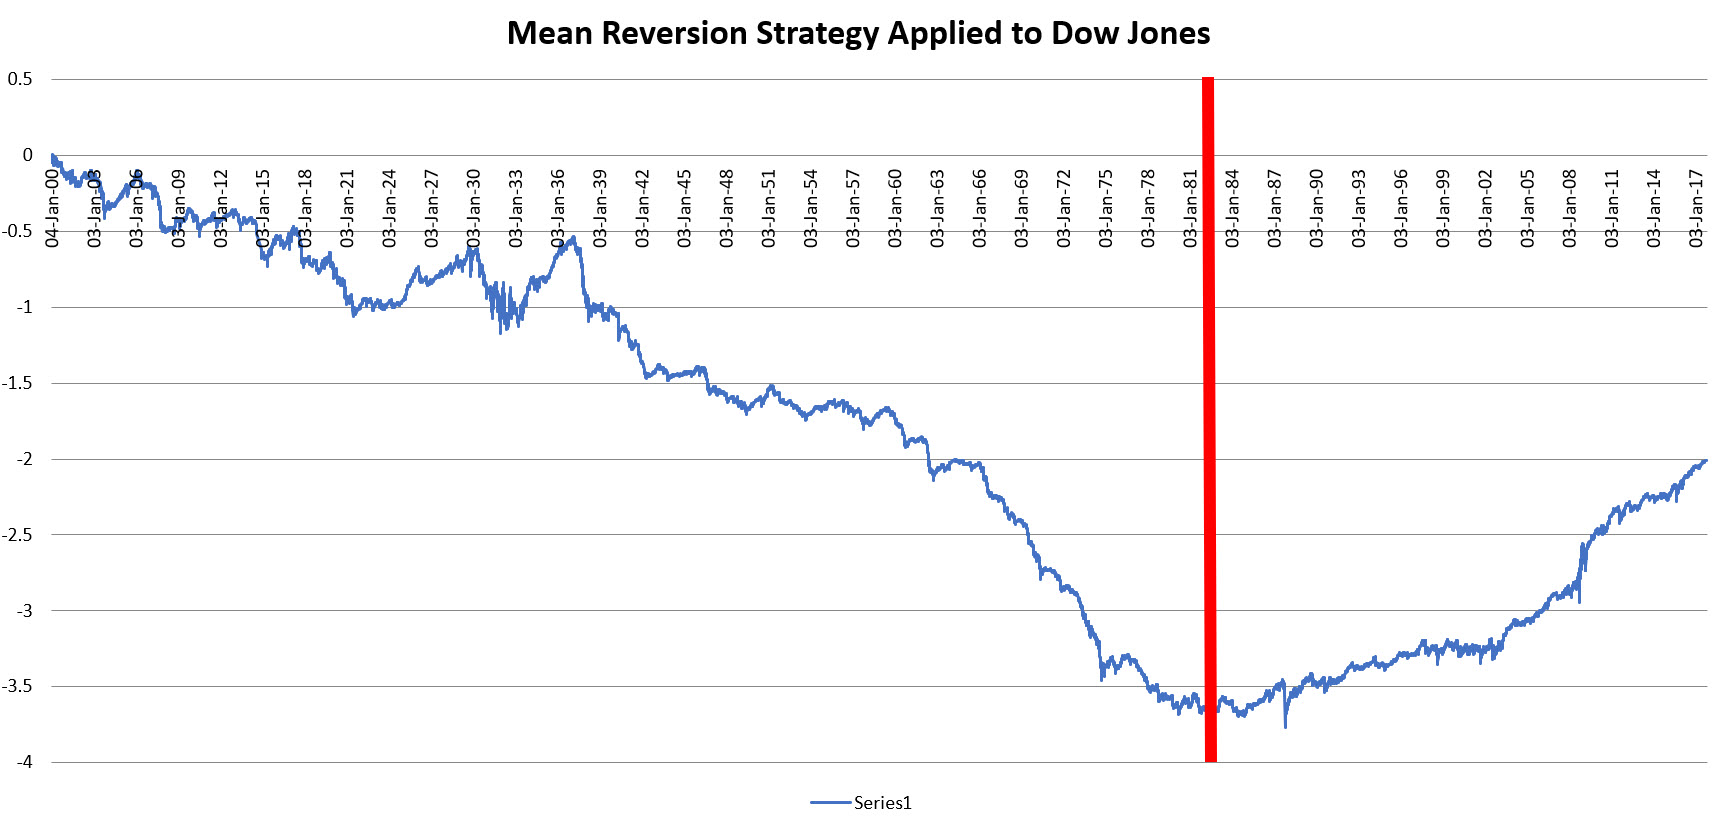 Mean Reversion Strategy Applied to Dow Jones